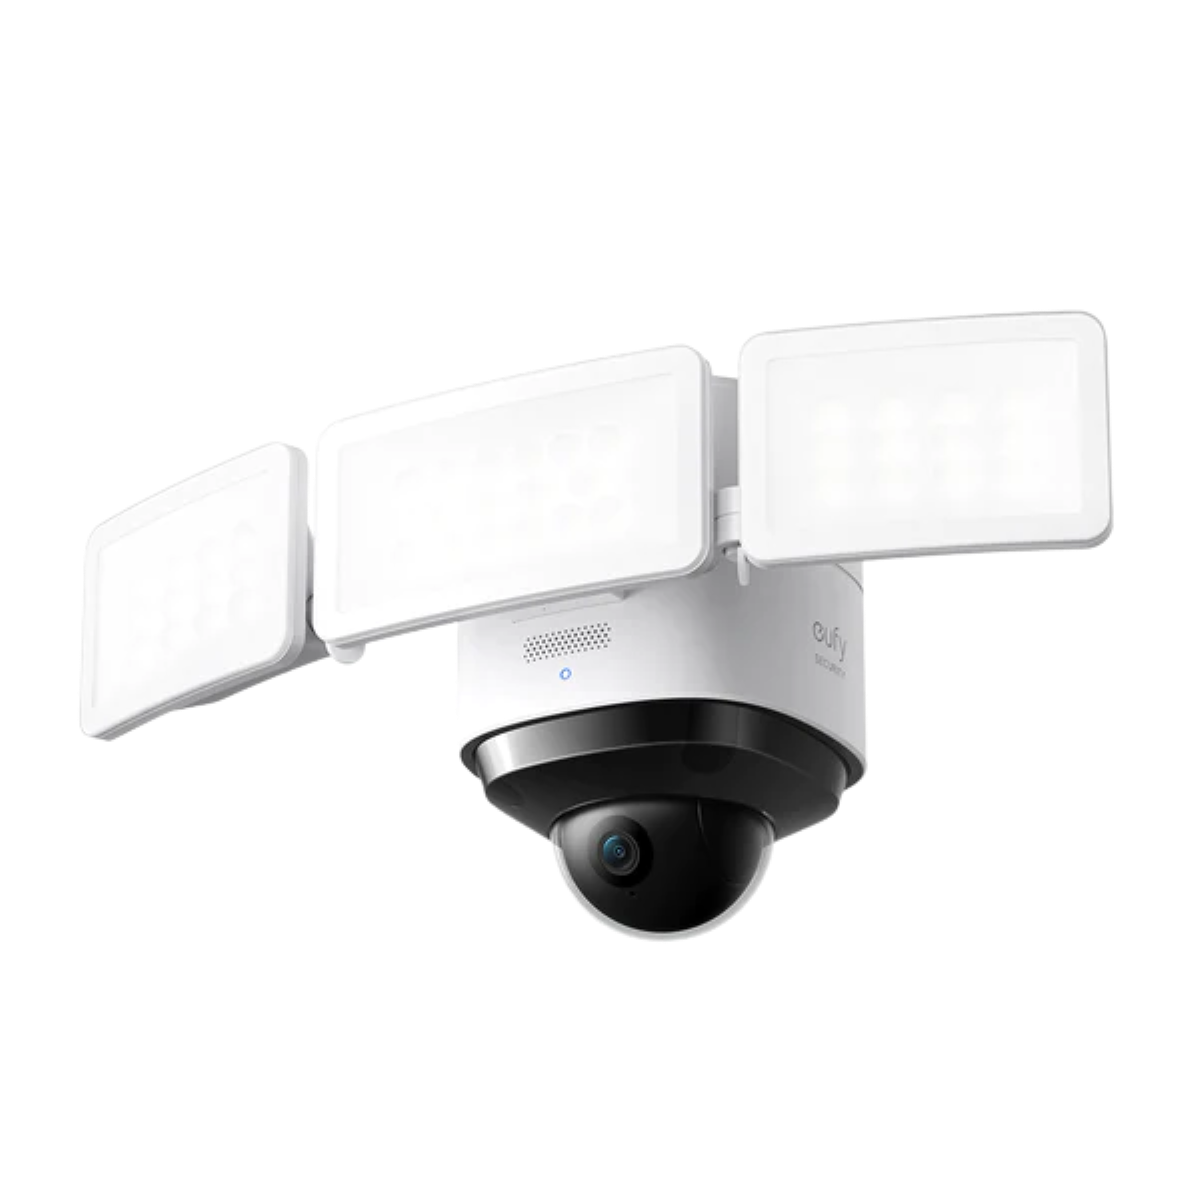 All-New Ring Floodlight Cam Wired Plus, Black - 1080P Hd Video,  Motion-Activated Led Floodlights, Built-In Siren, Hardwired Installation